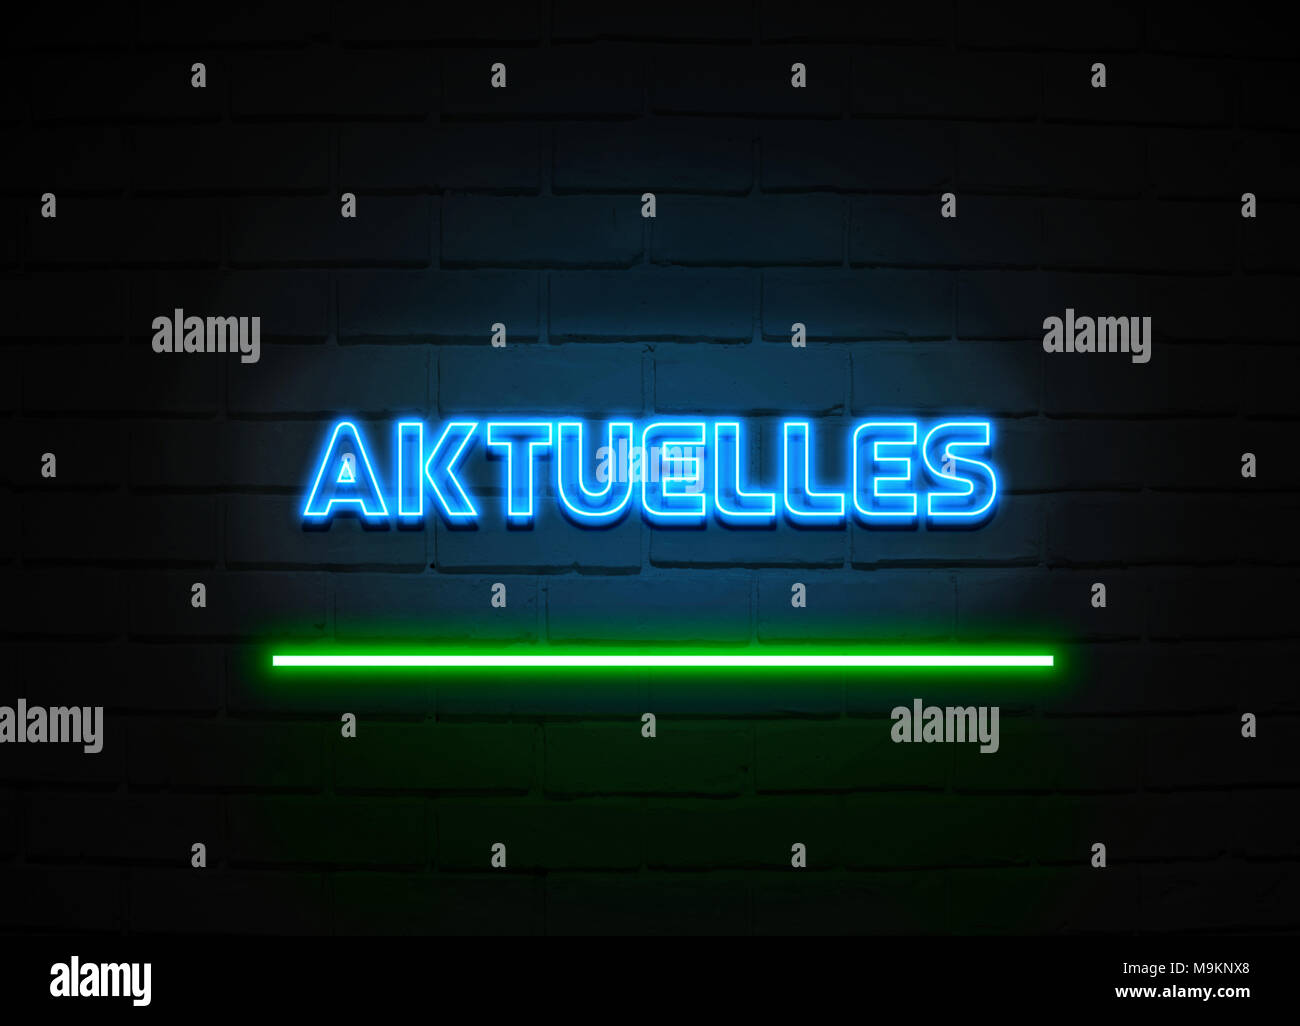 Aktuelles neon sign - Glowing Neon Sign on brickwall wall - 3D rendered royalty free stock illustration. Stock Photo